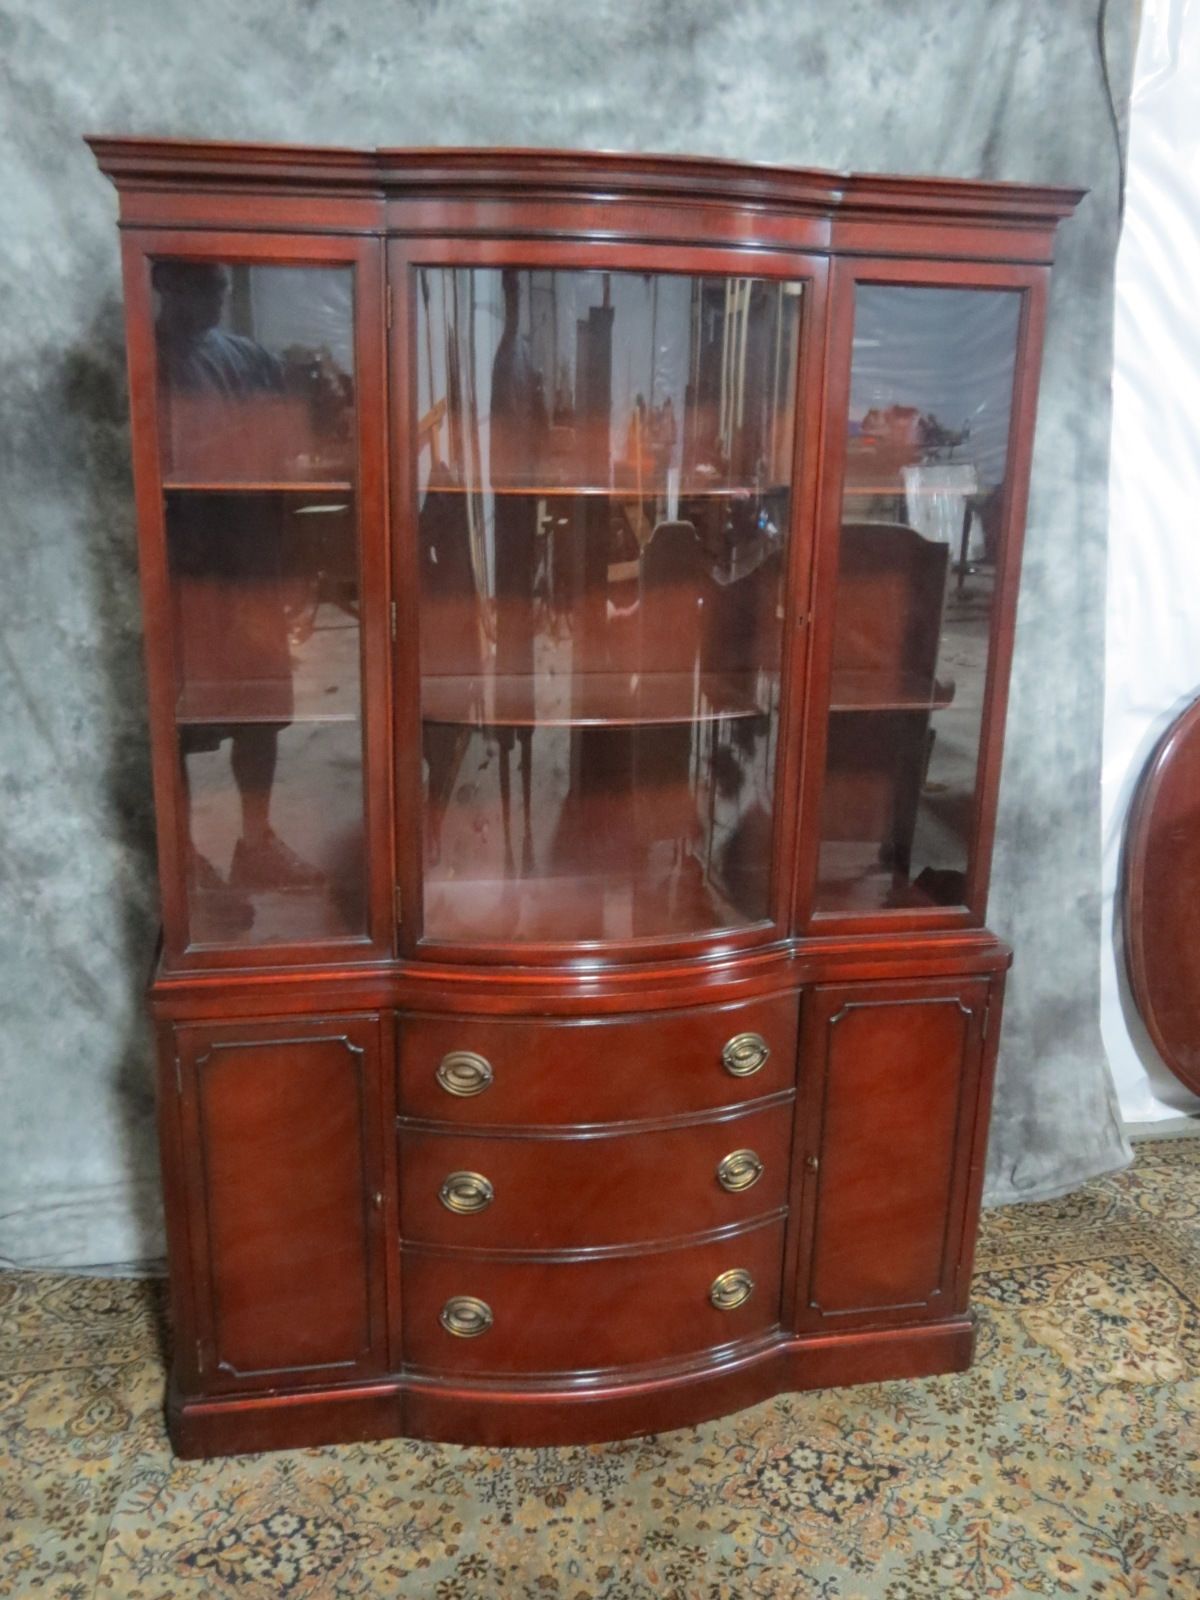 2017 Antique Breakfront Wardrobes In Amazing Antique Drexel Oversized Bowfront China Cabinet Breakfront (View 10 of 15)